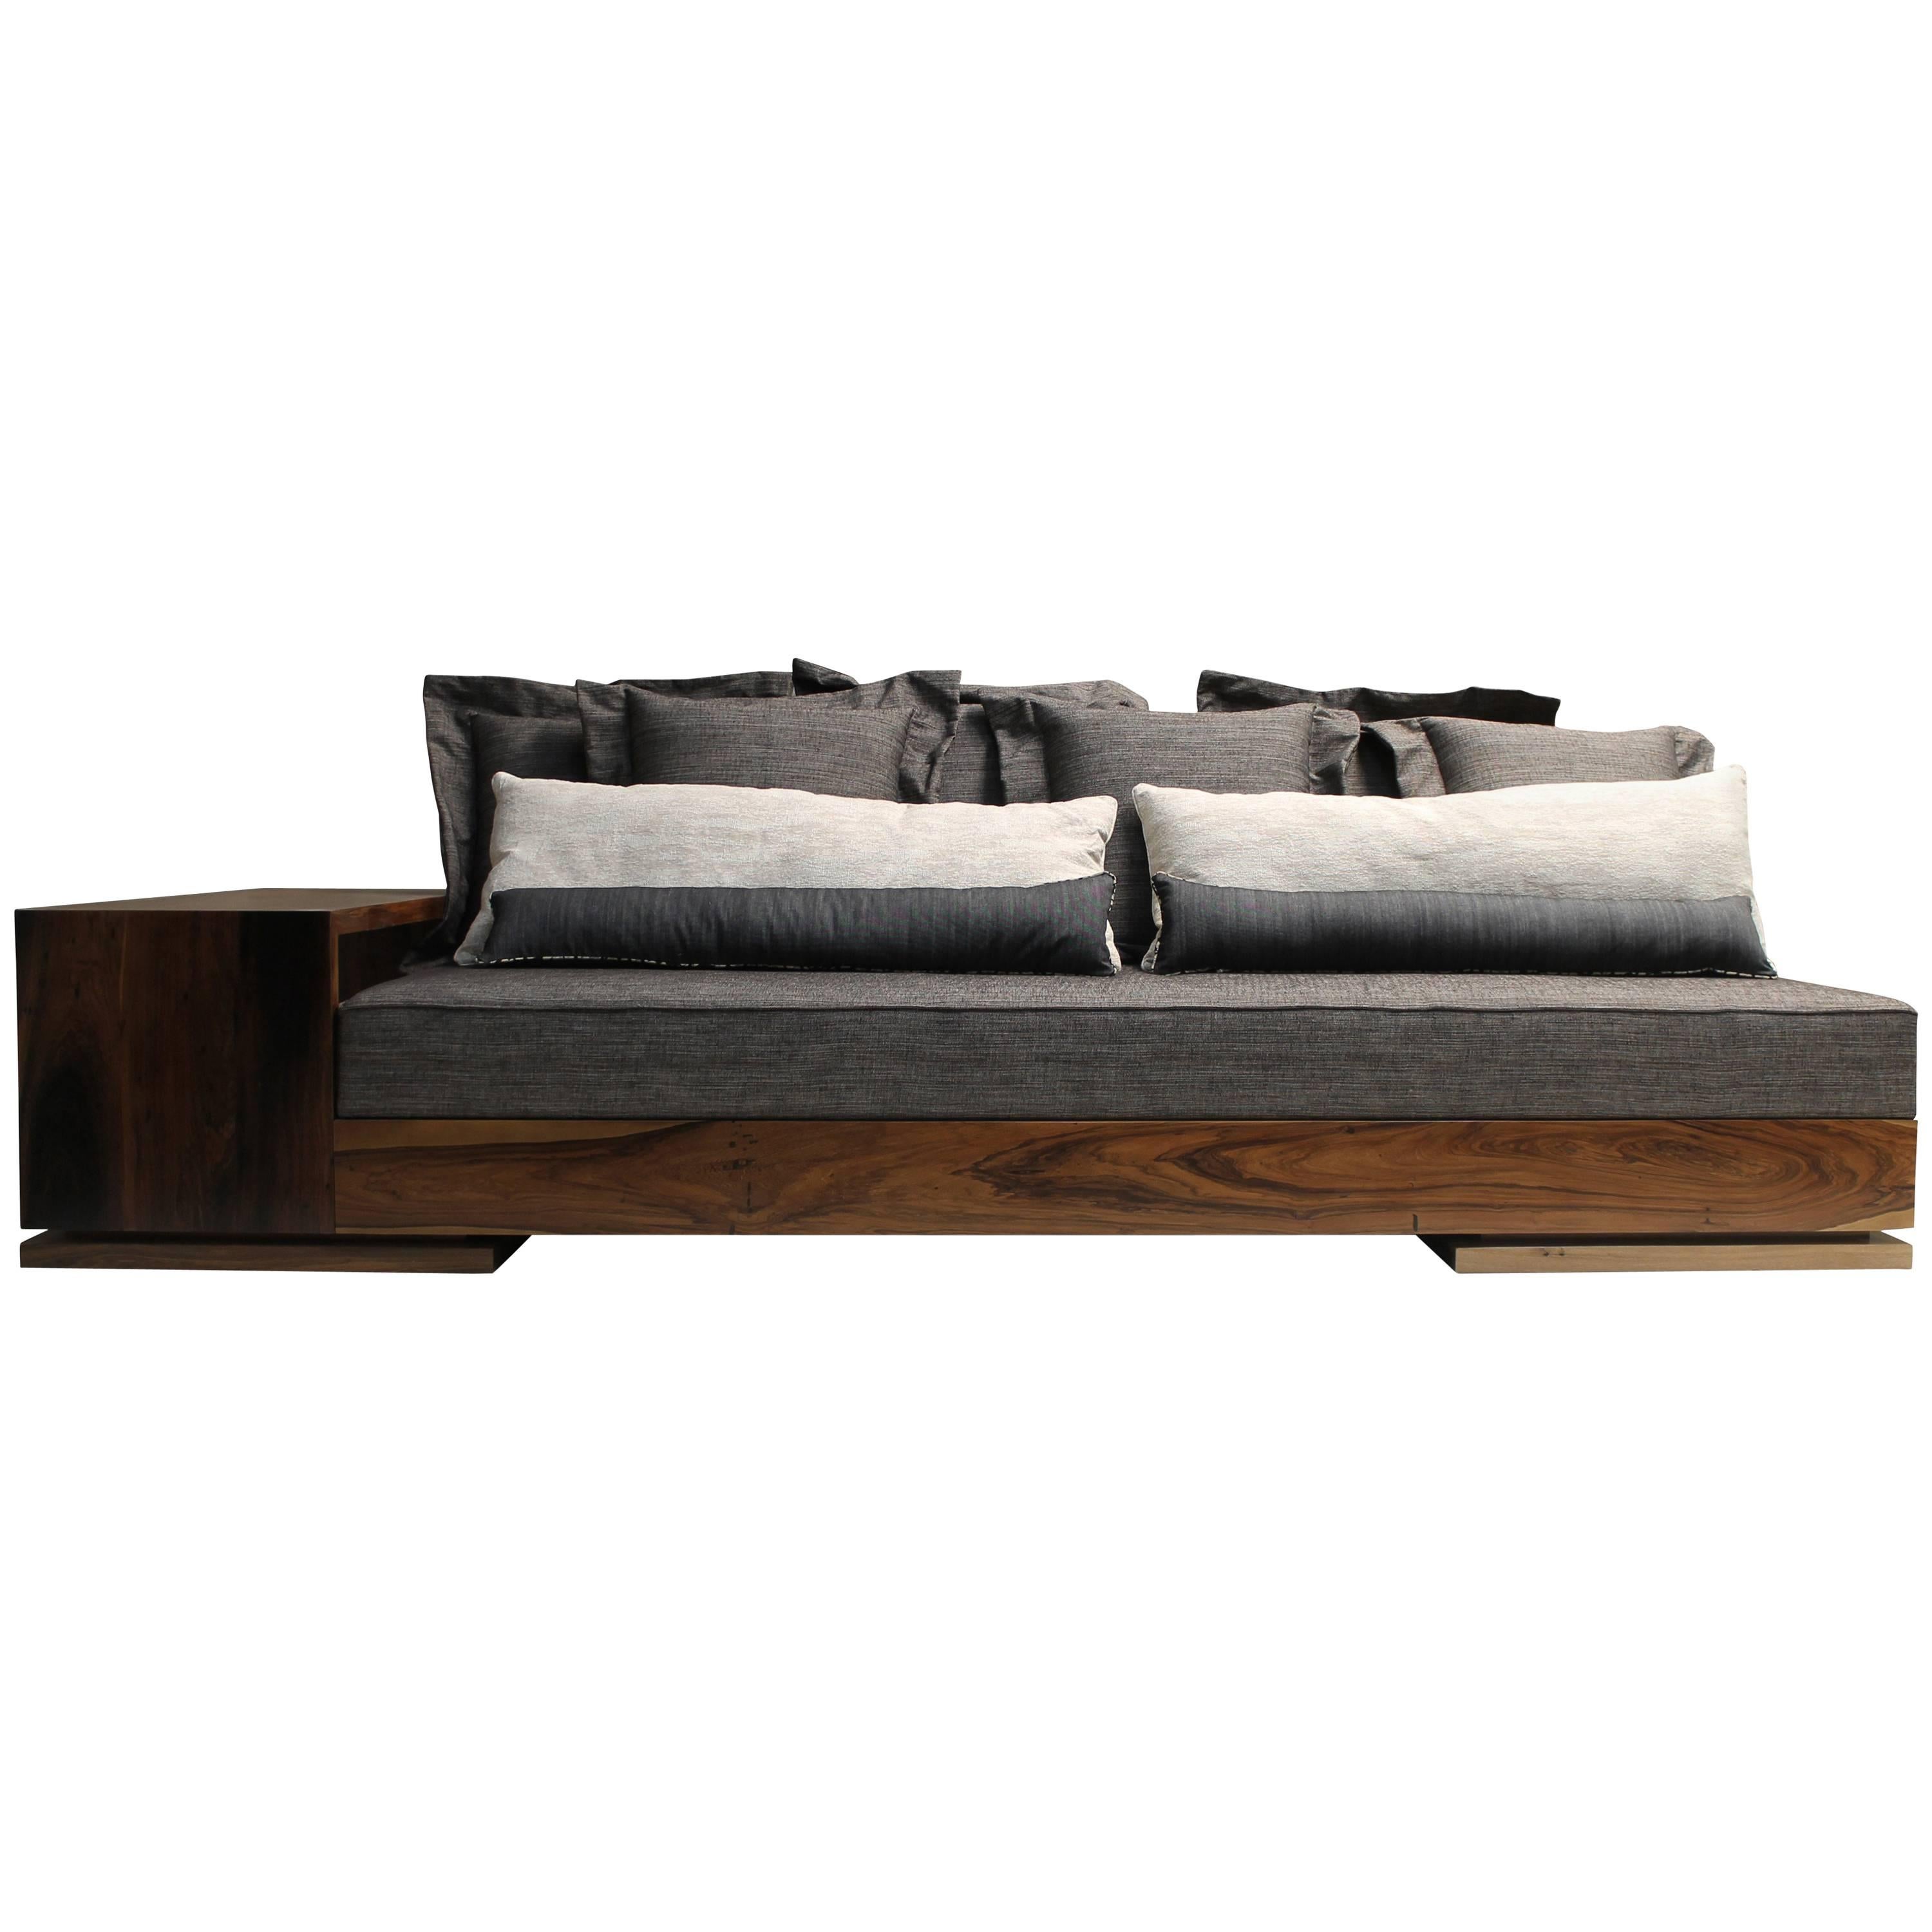 Custom Modern Sofa in Rosewood with Shelving from Costantini, Patone